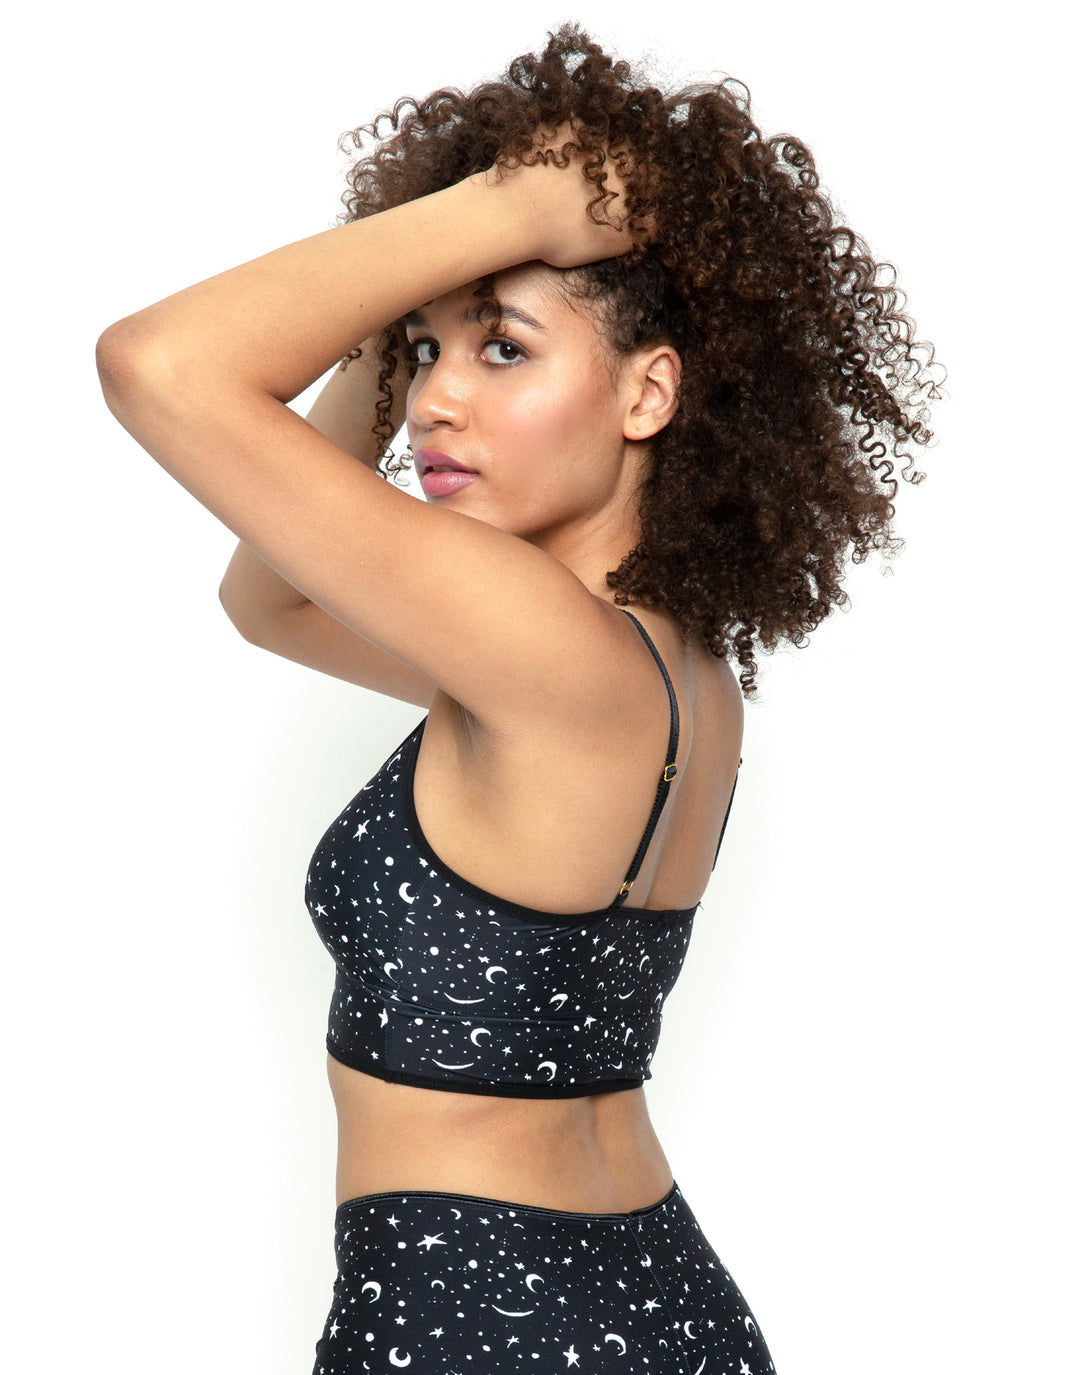 Classic bralet in Moon and Stars - Cameo Clothing Line